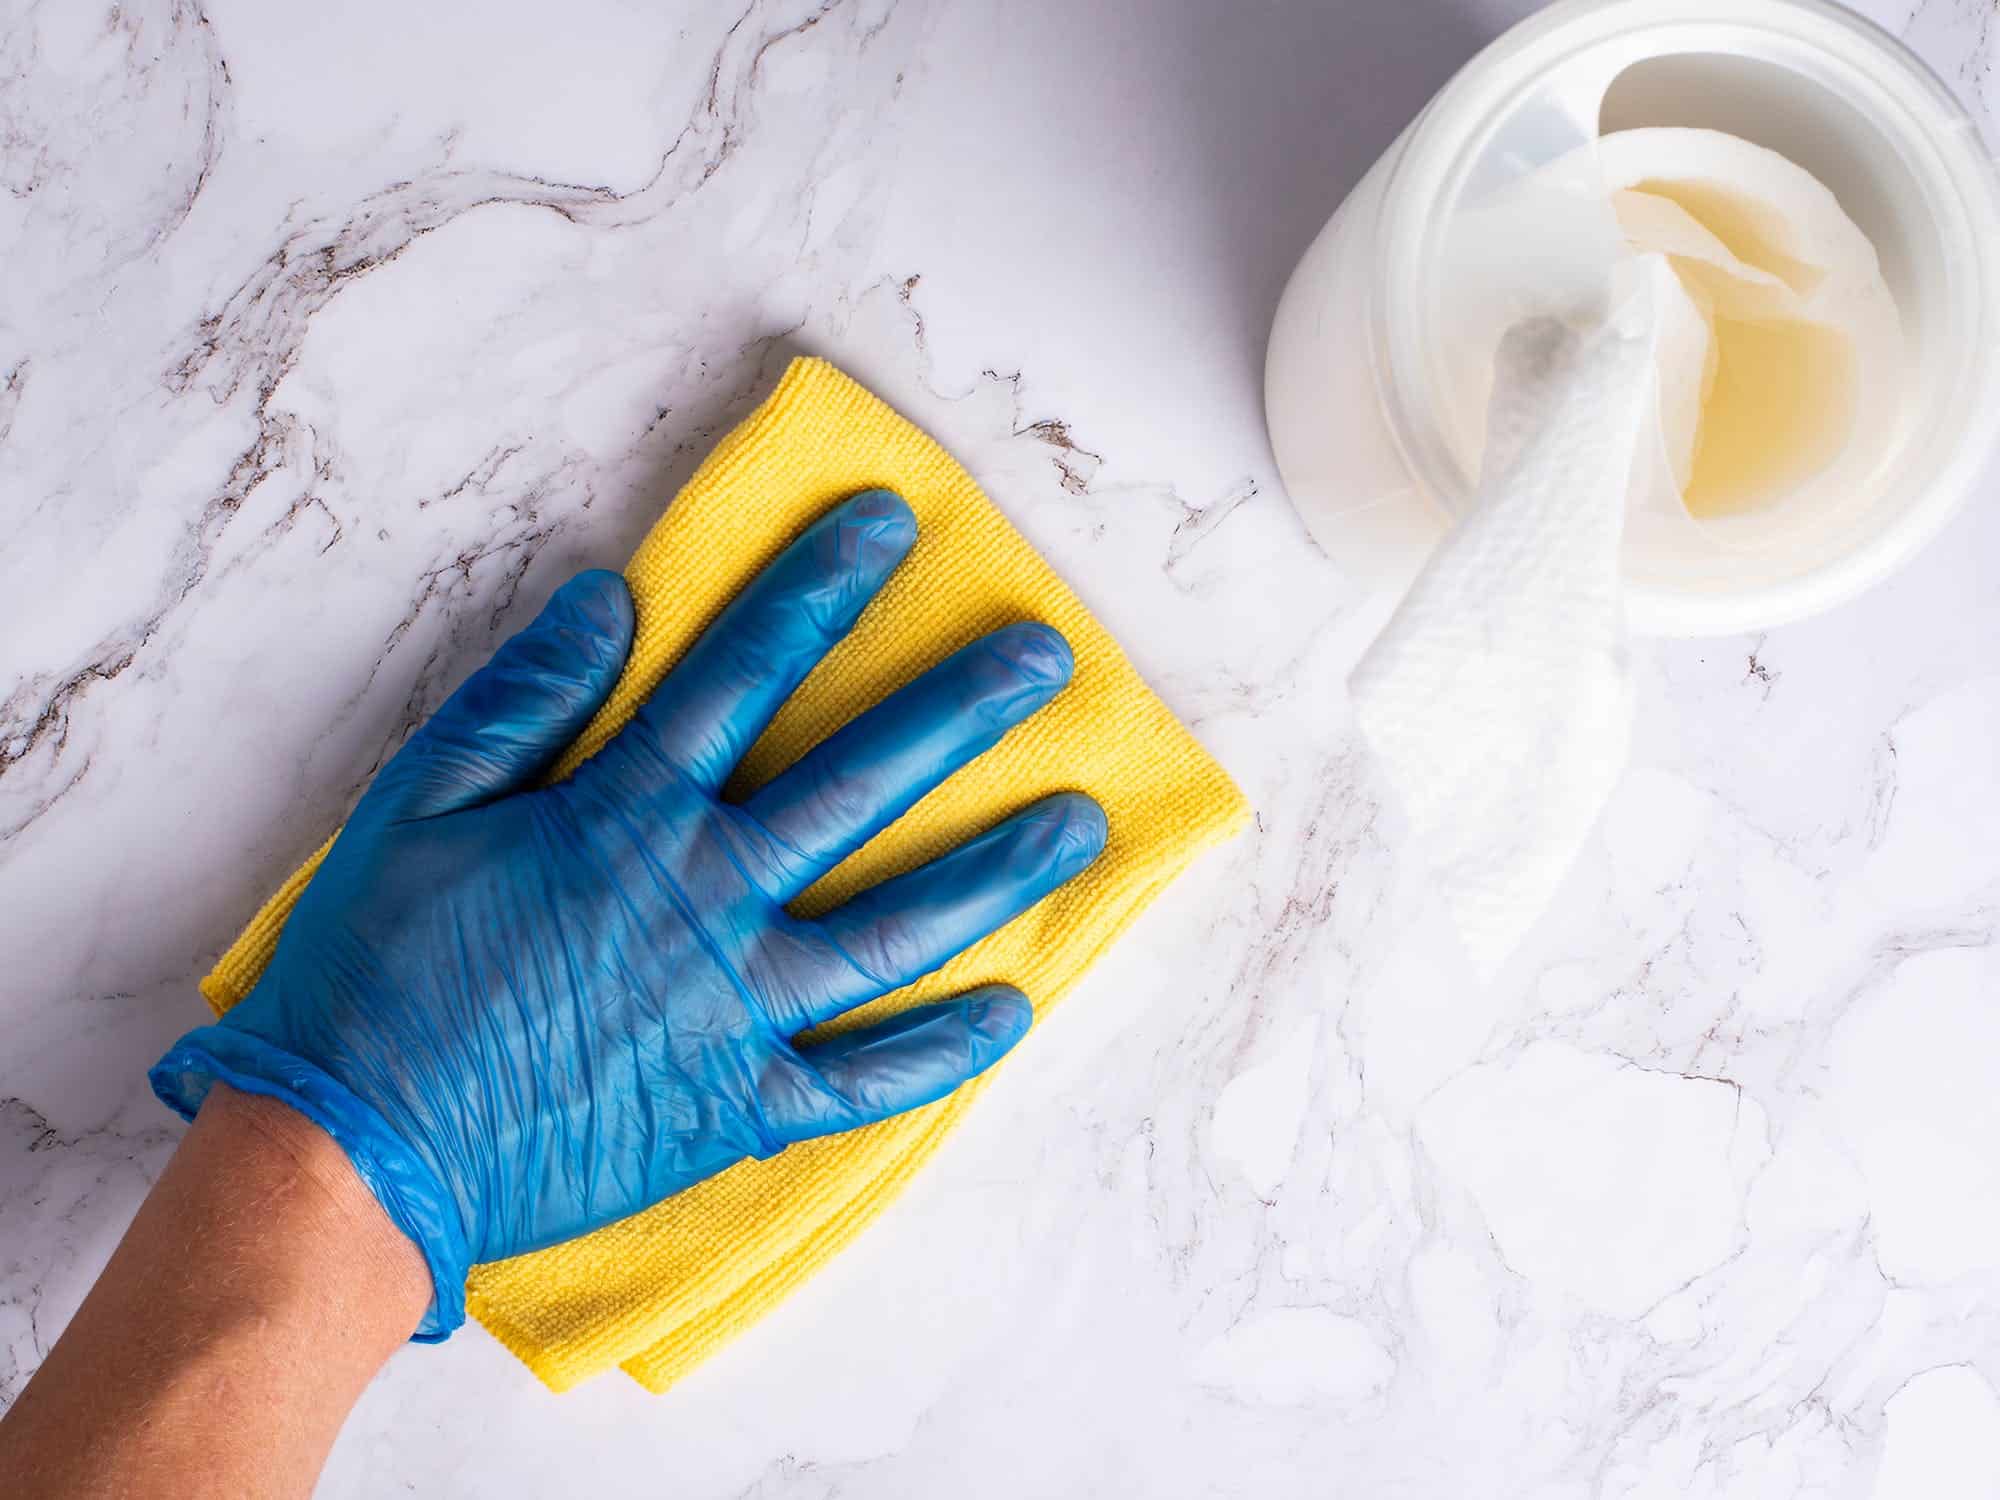 Home Cleaning Hacks